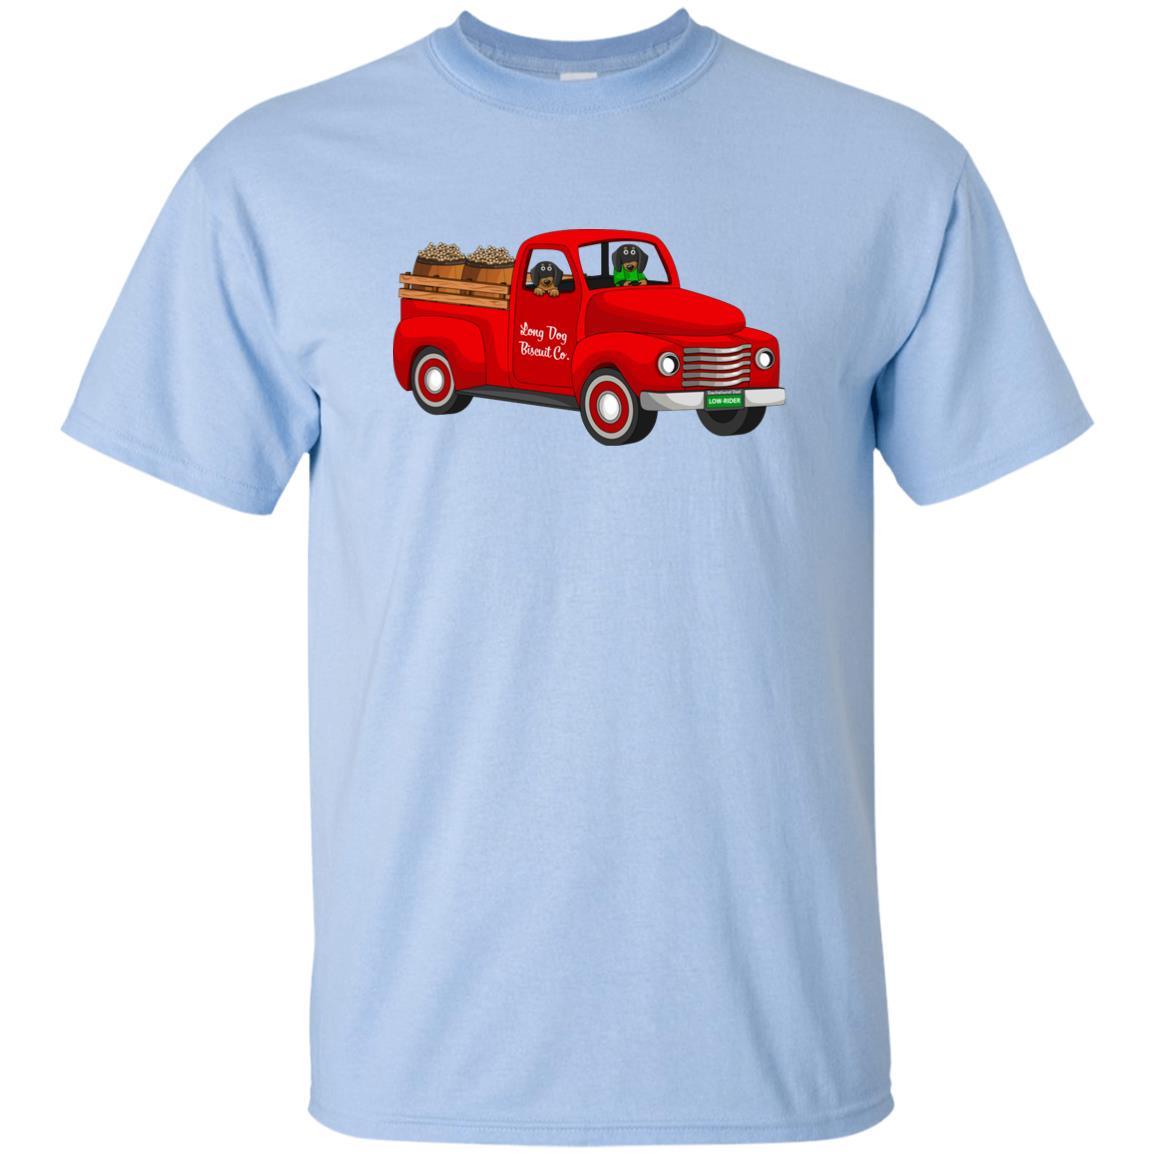 Dachshunds Biscuit Truck Black and Tan Dogs Shirts